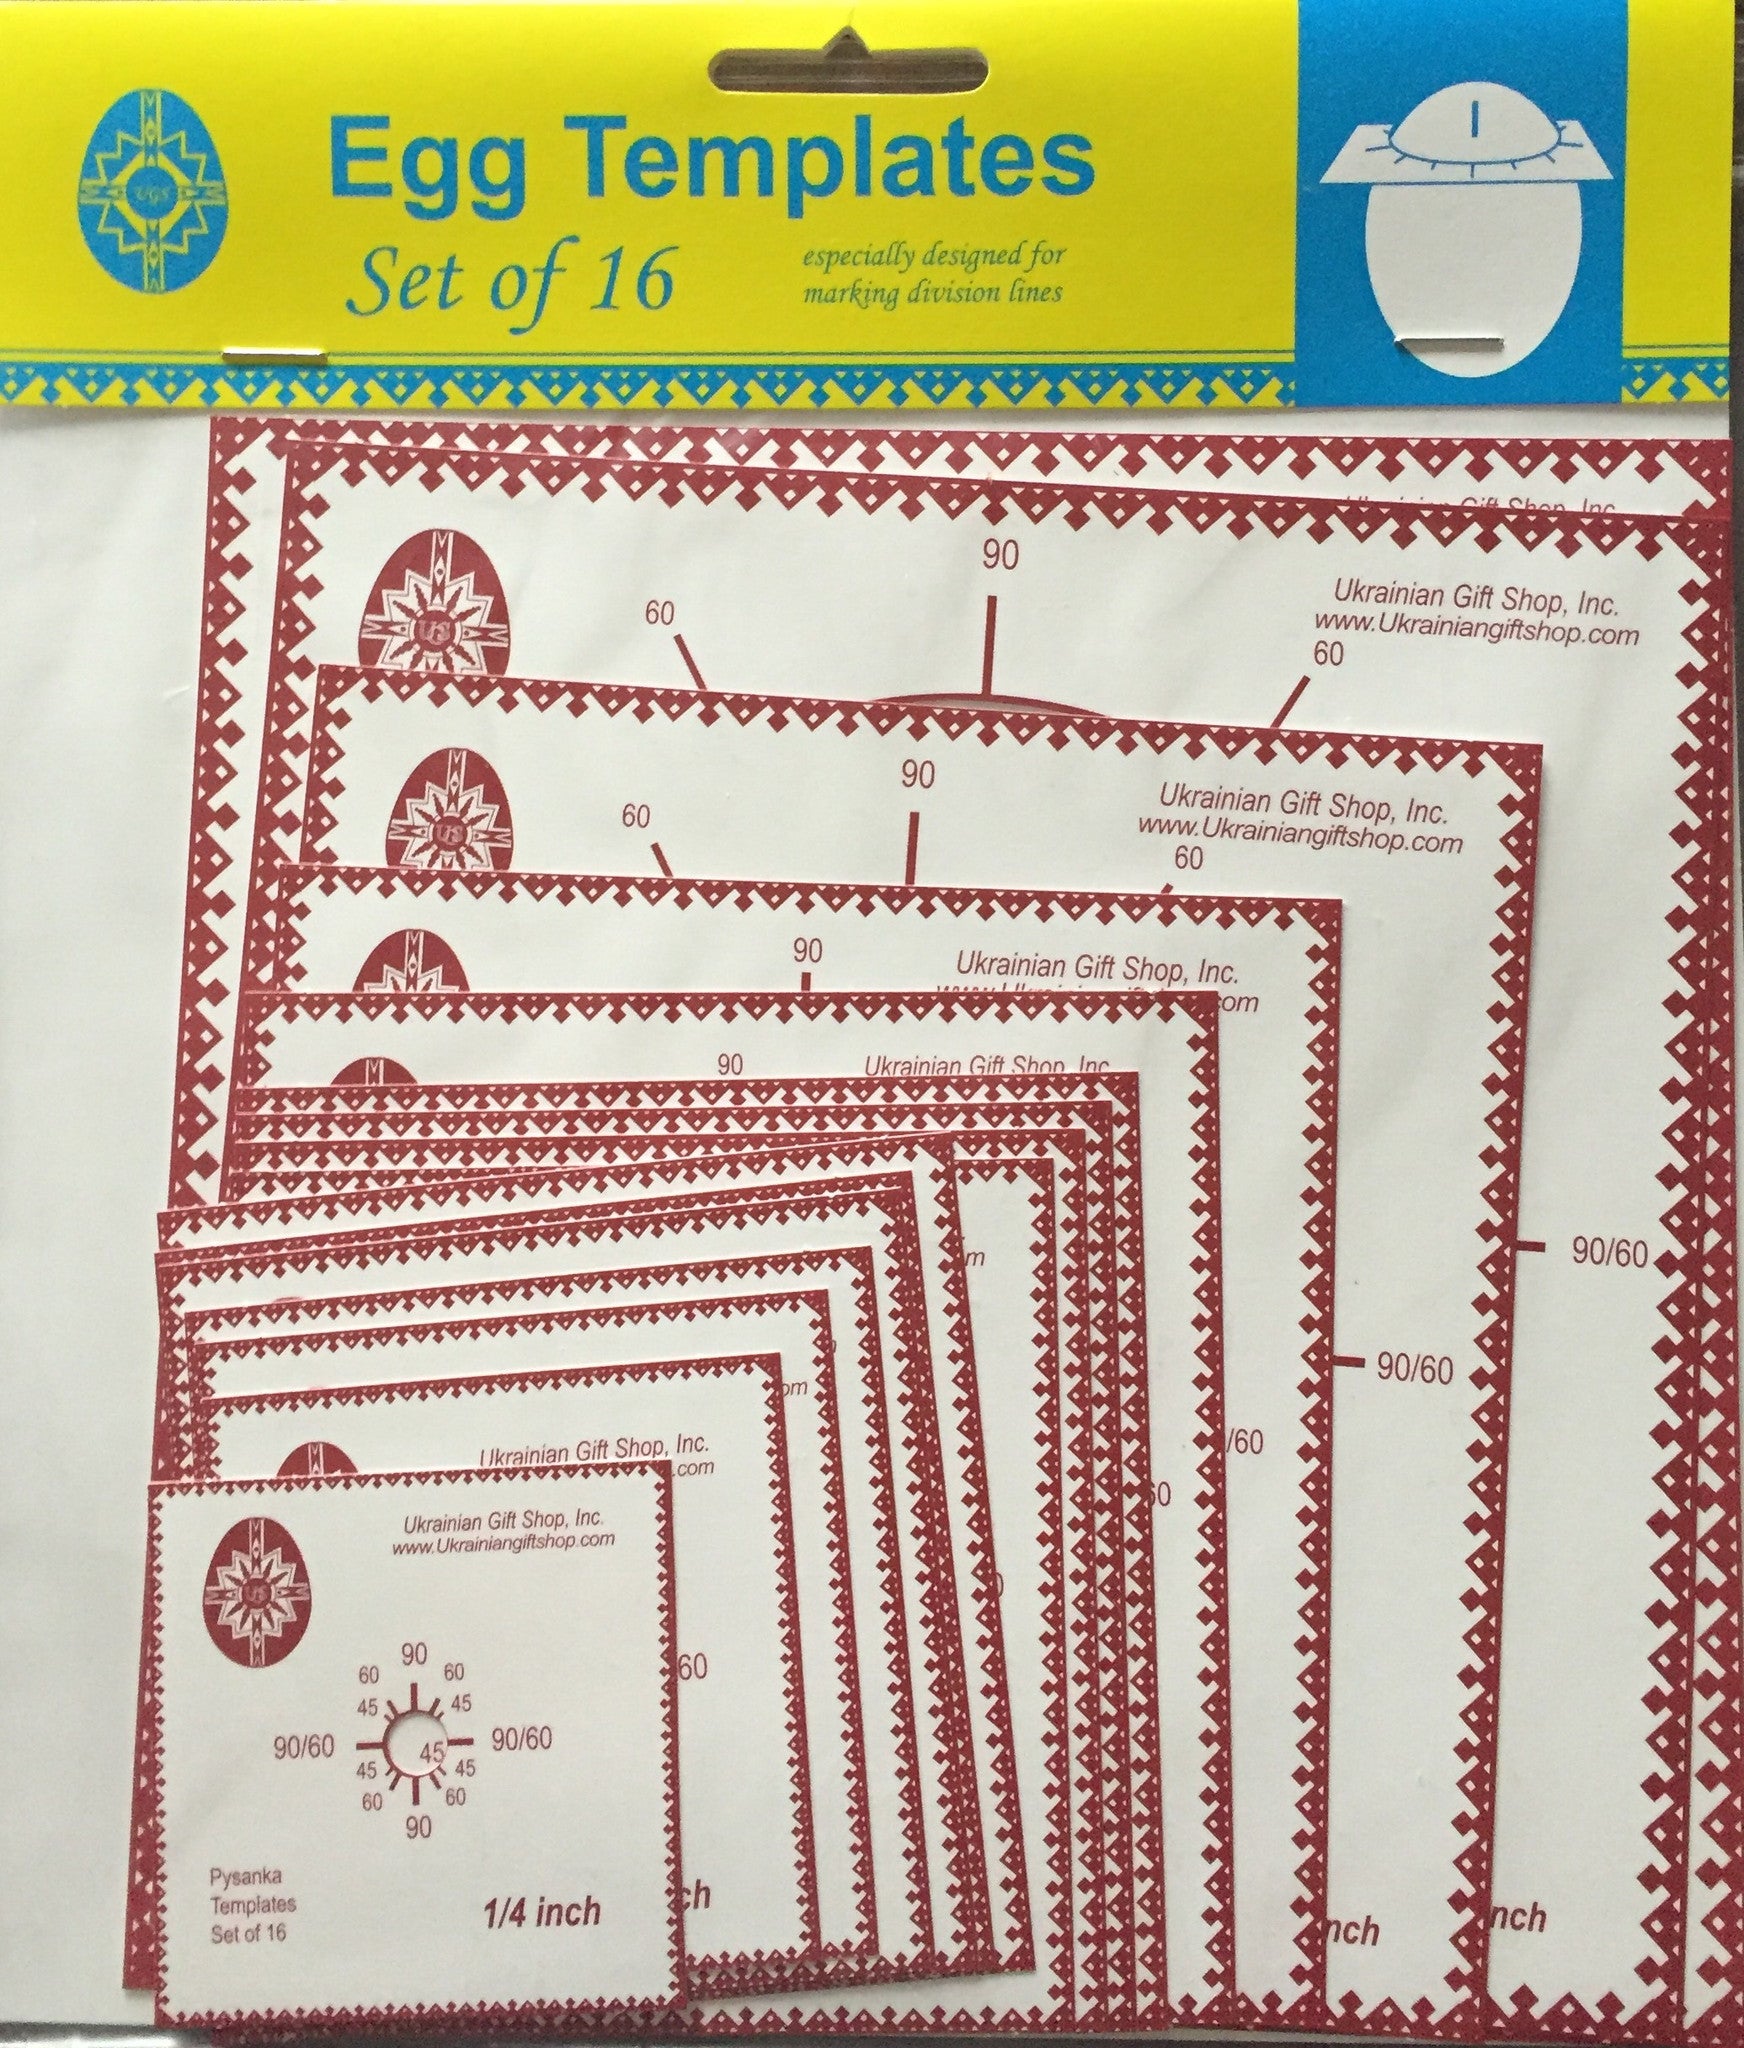 Egg Templates for Pysanky Divisions